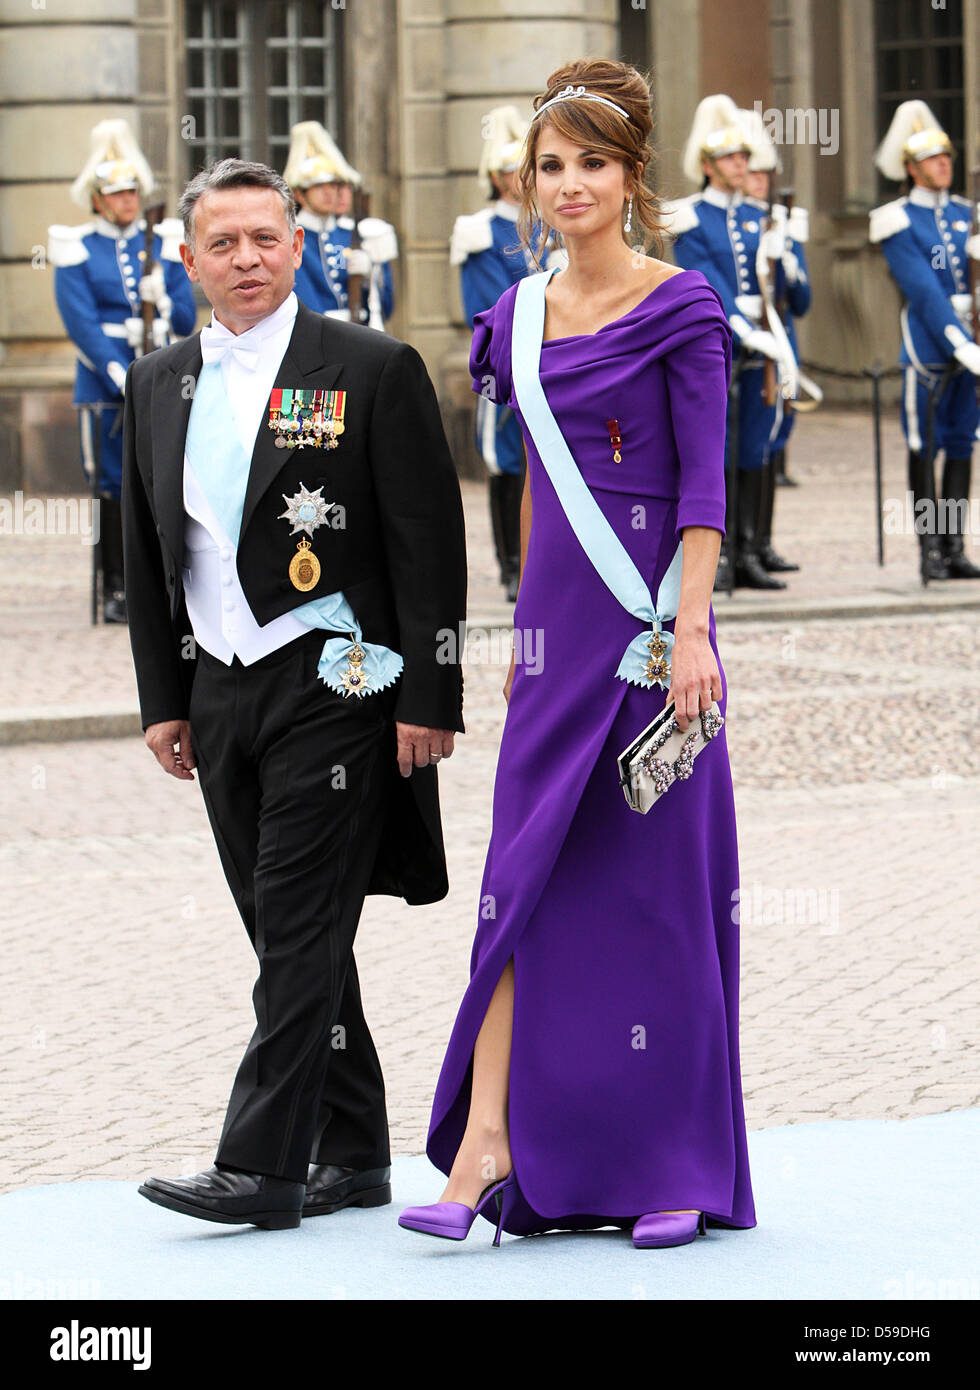 King Abdullah II of Jordan and his wife Queen Rania of Jordan arrive for the wedding of Crown Princess Victoria of Sweden and Daniel Westling in Stockholm, Sweden, 19 June 2010. Photo: Albert Nieboer (NETHERLANDS OUT) Stock Photo